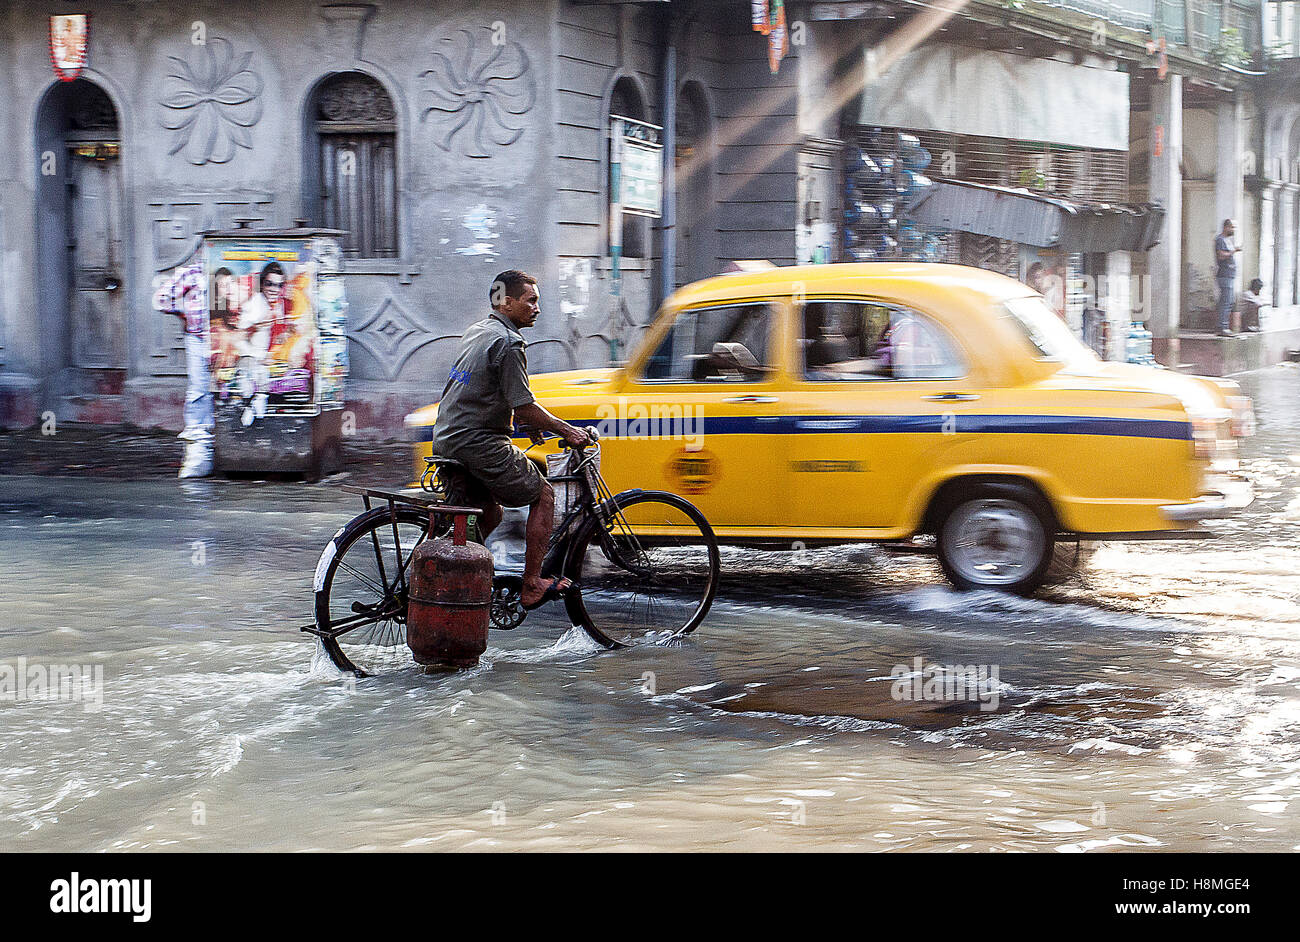 During the Indian monsoon a man cycles through floodwaters in historical Kalighat, Kolkata, India Stock Photo